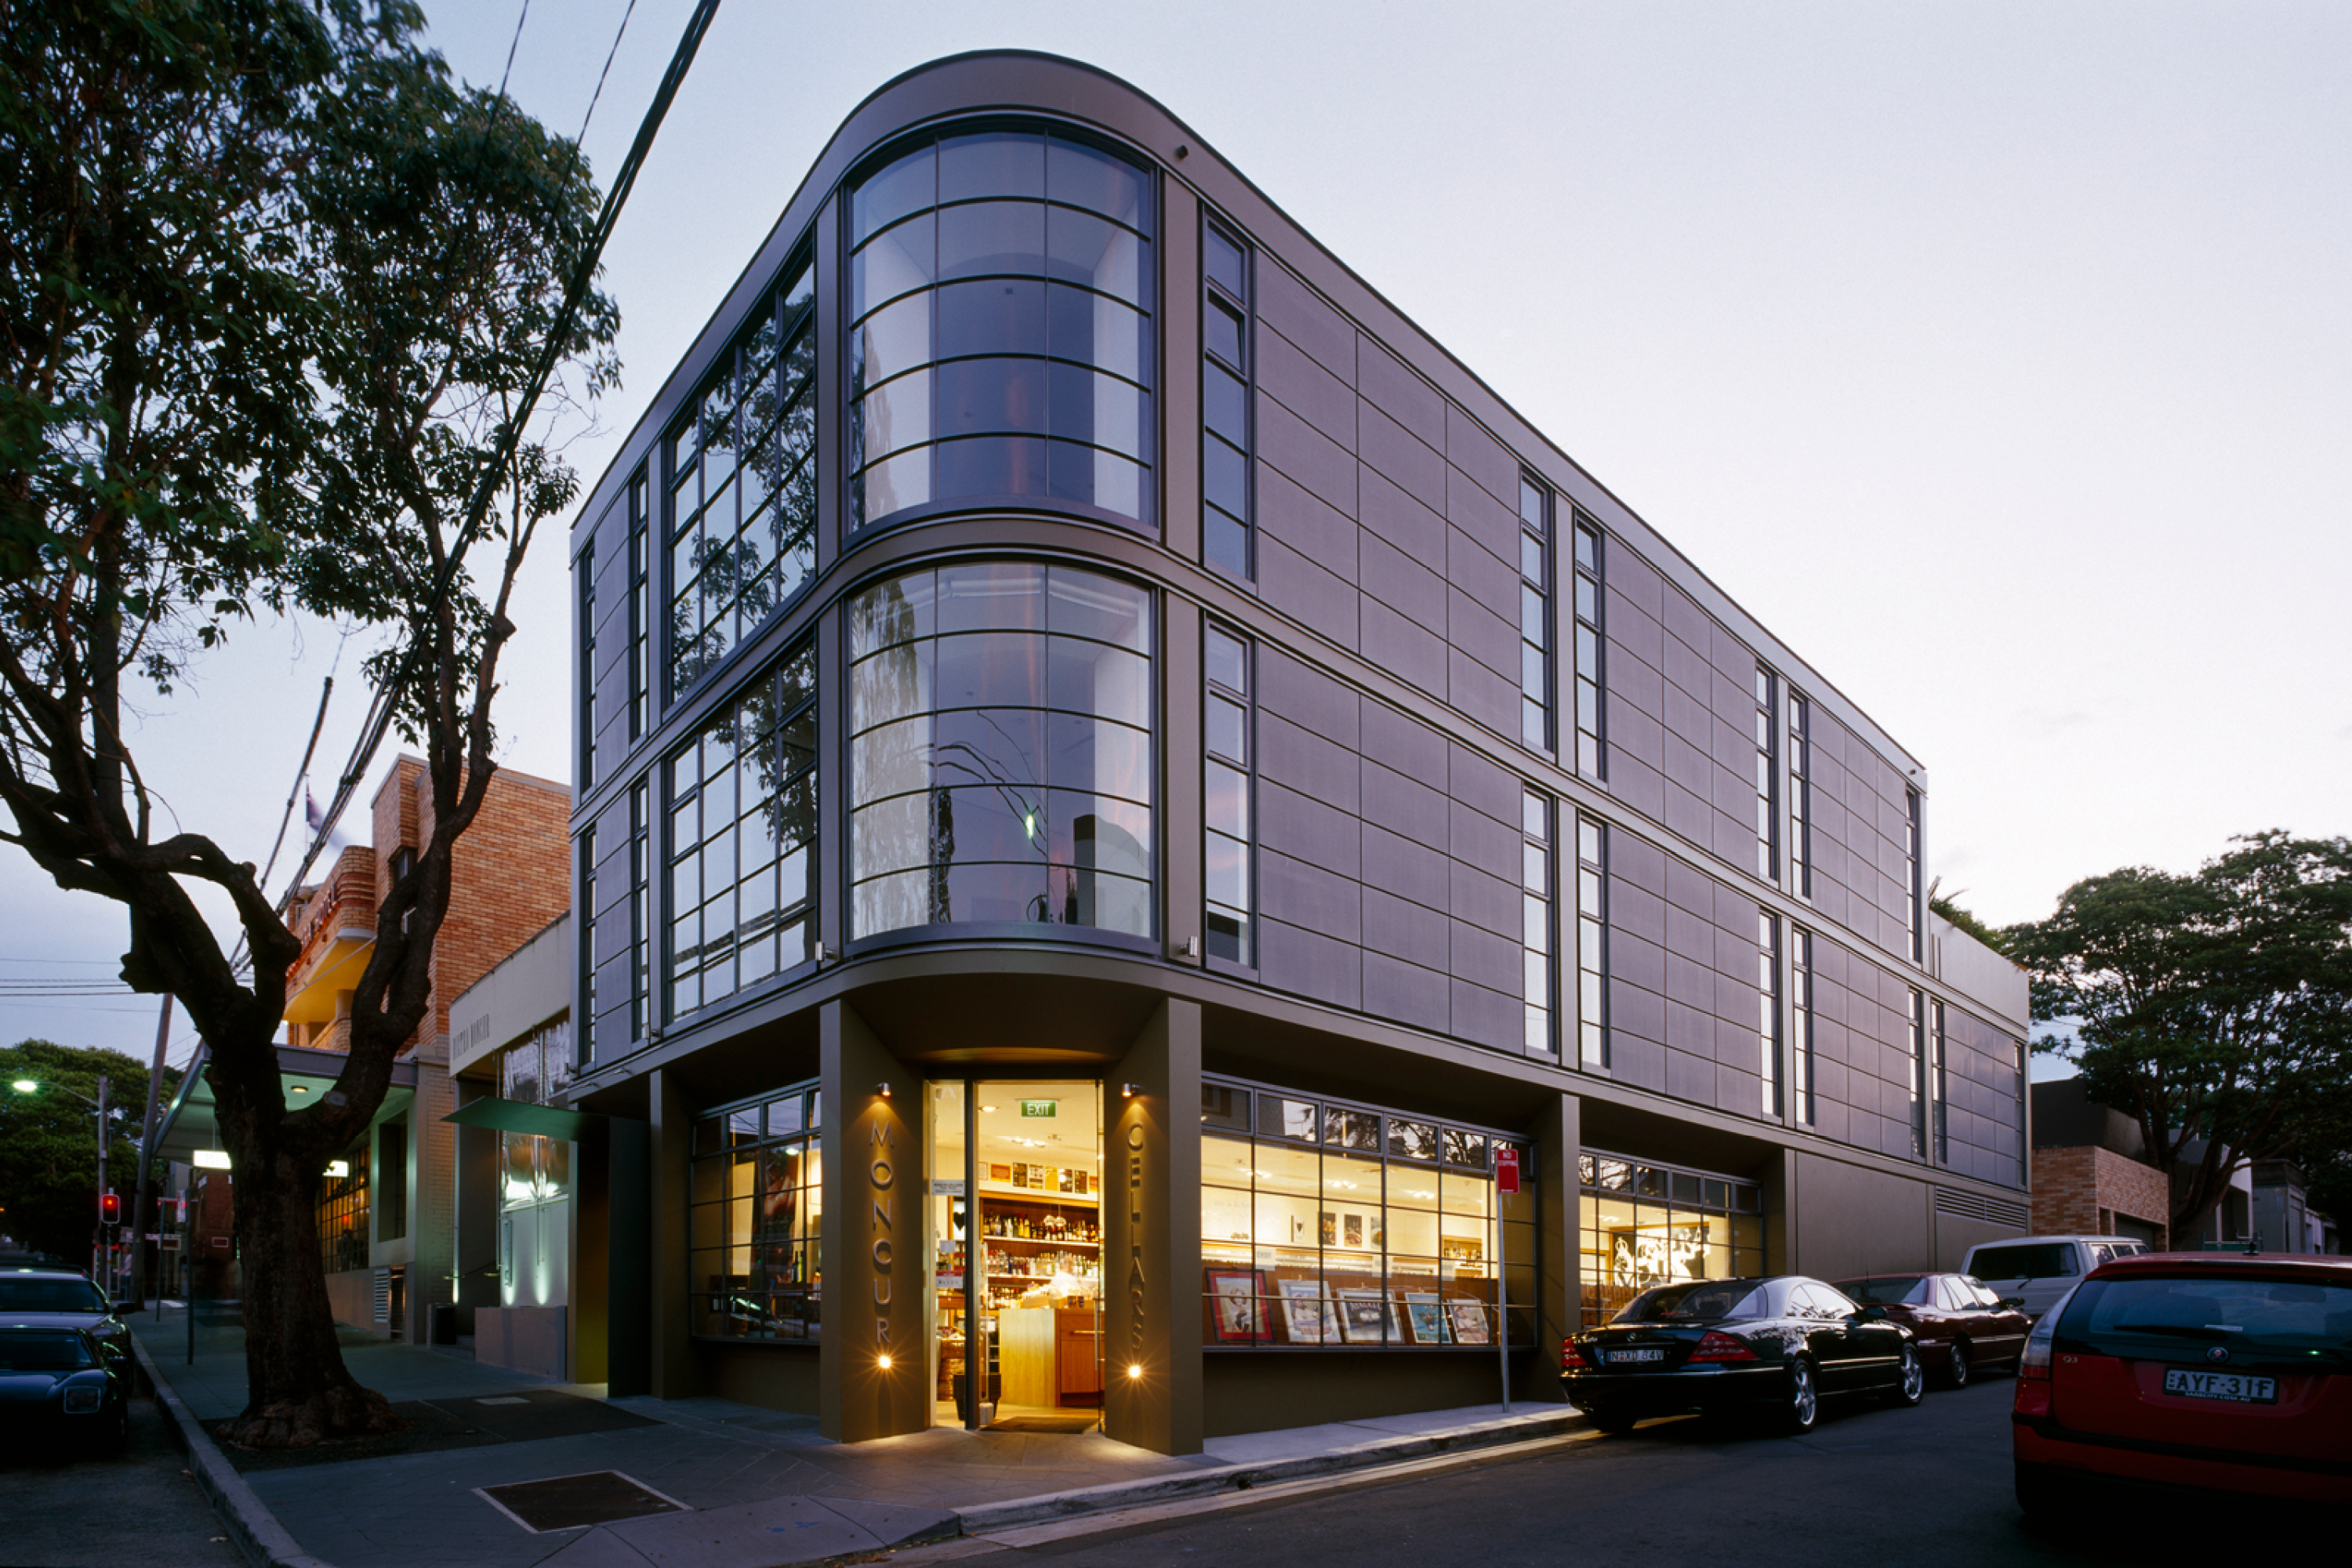 Photograph of exteriors of the award-wining Moncur Street Commercial designed by Tzannes